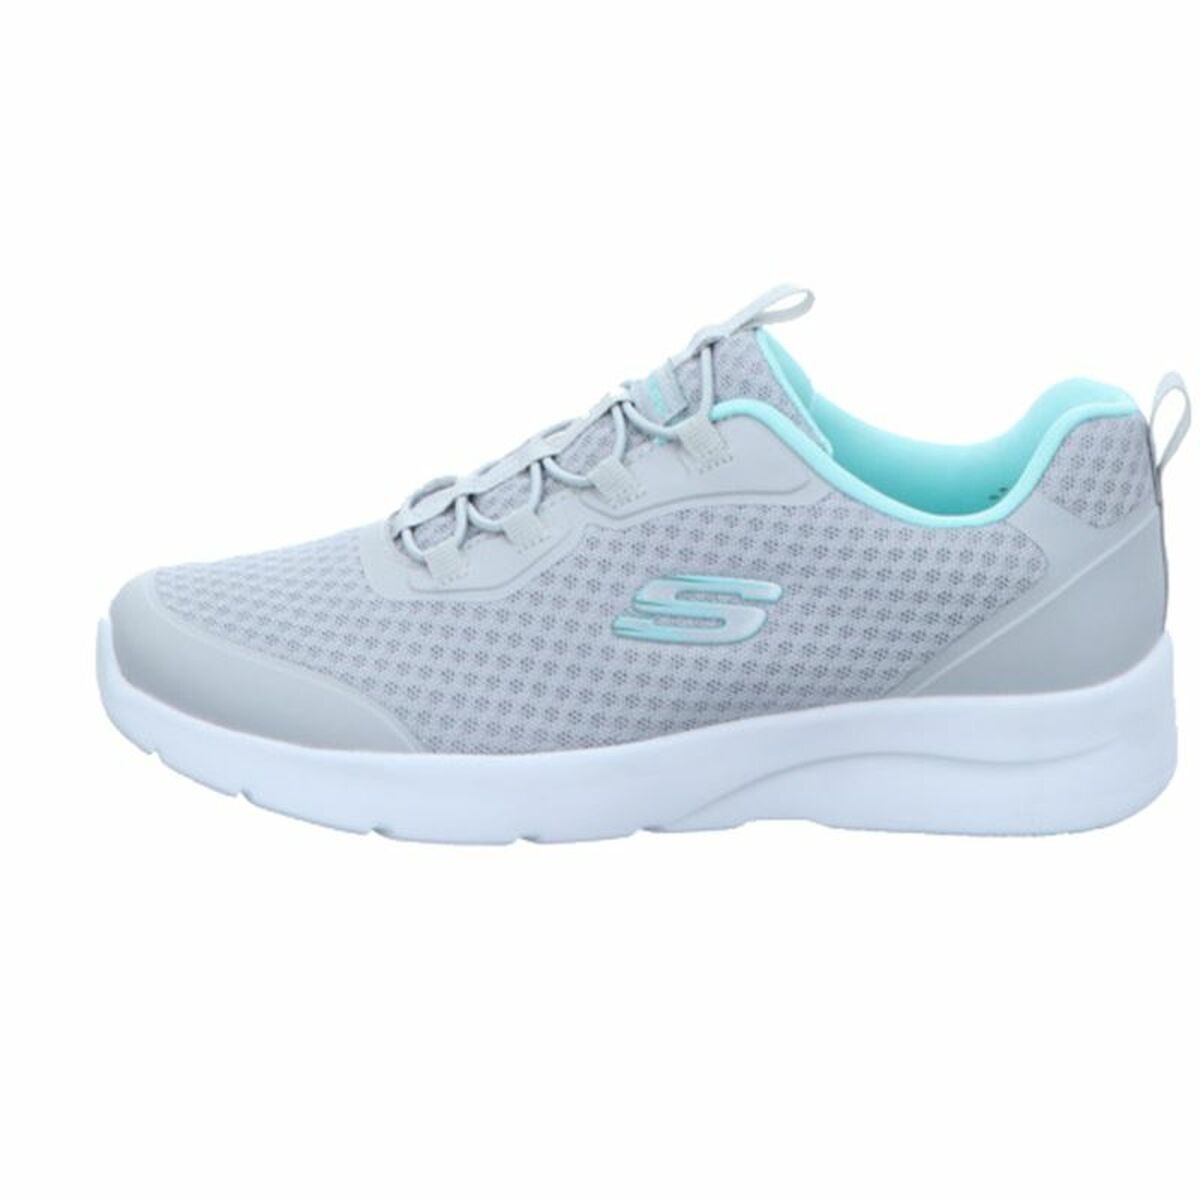 Sports Trainers for Women Skechers Dynamight 2.0 Grey